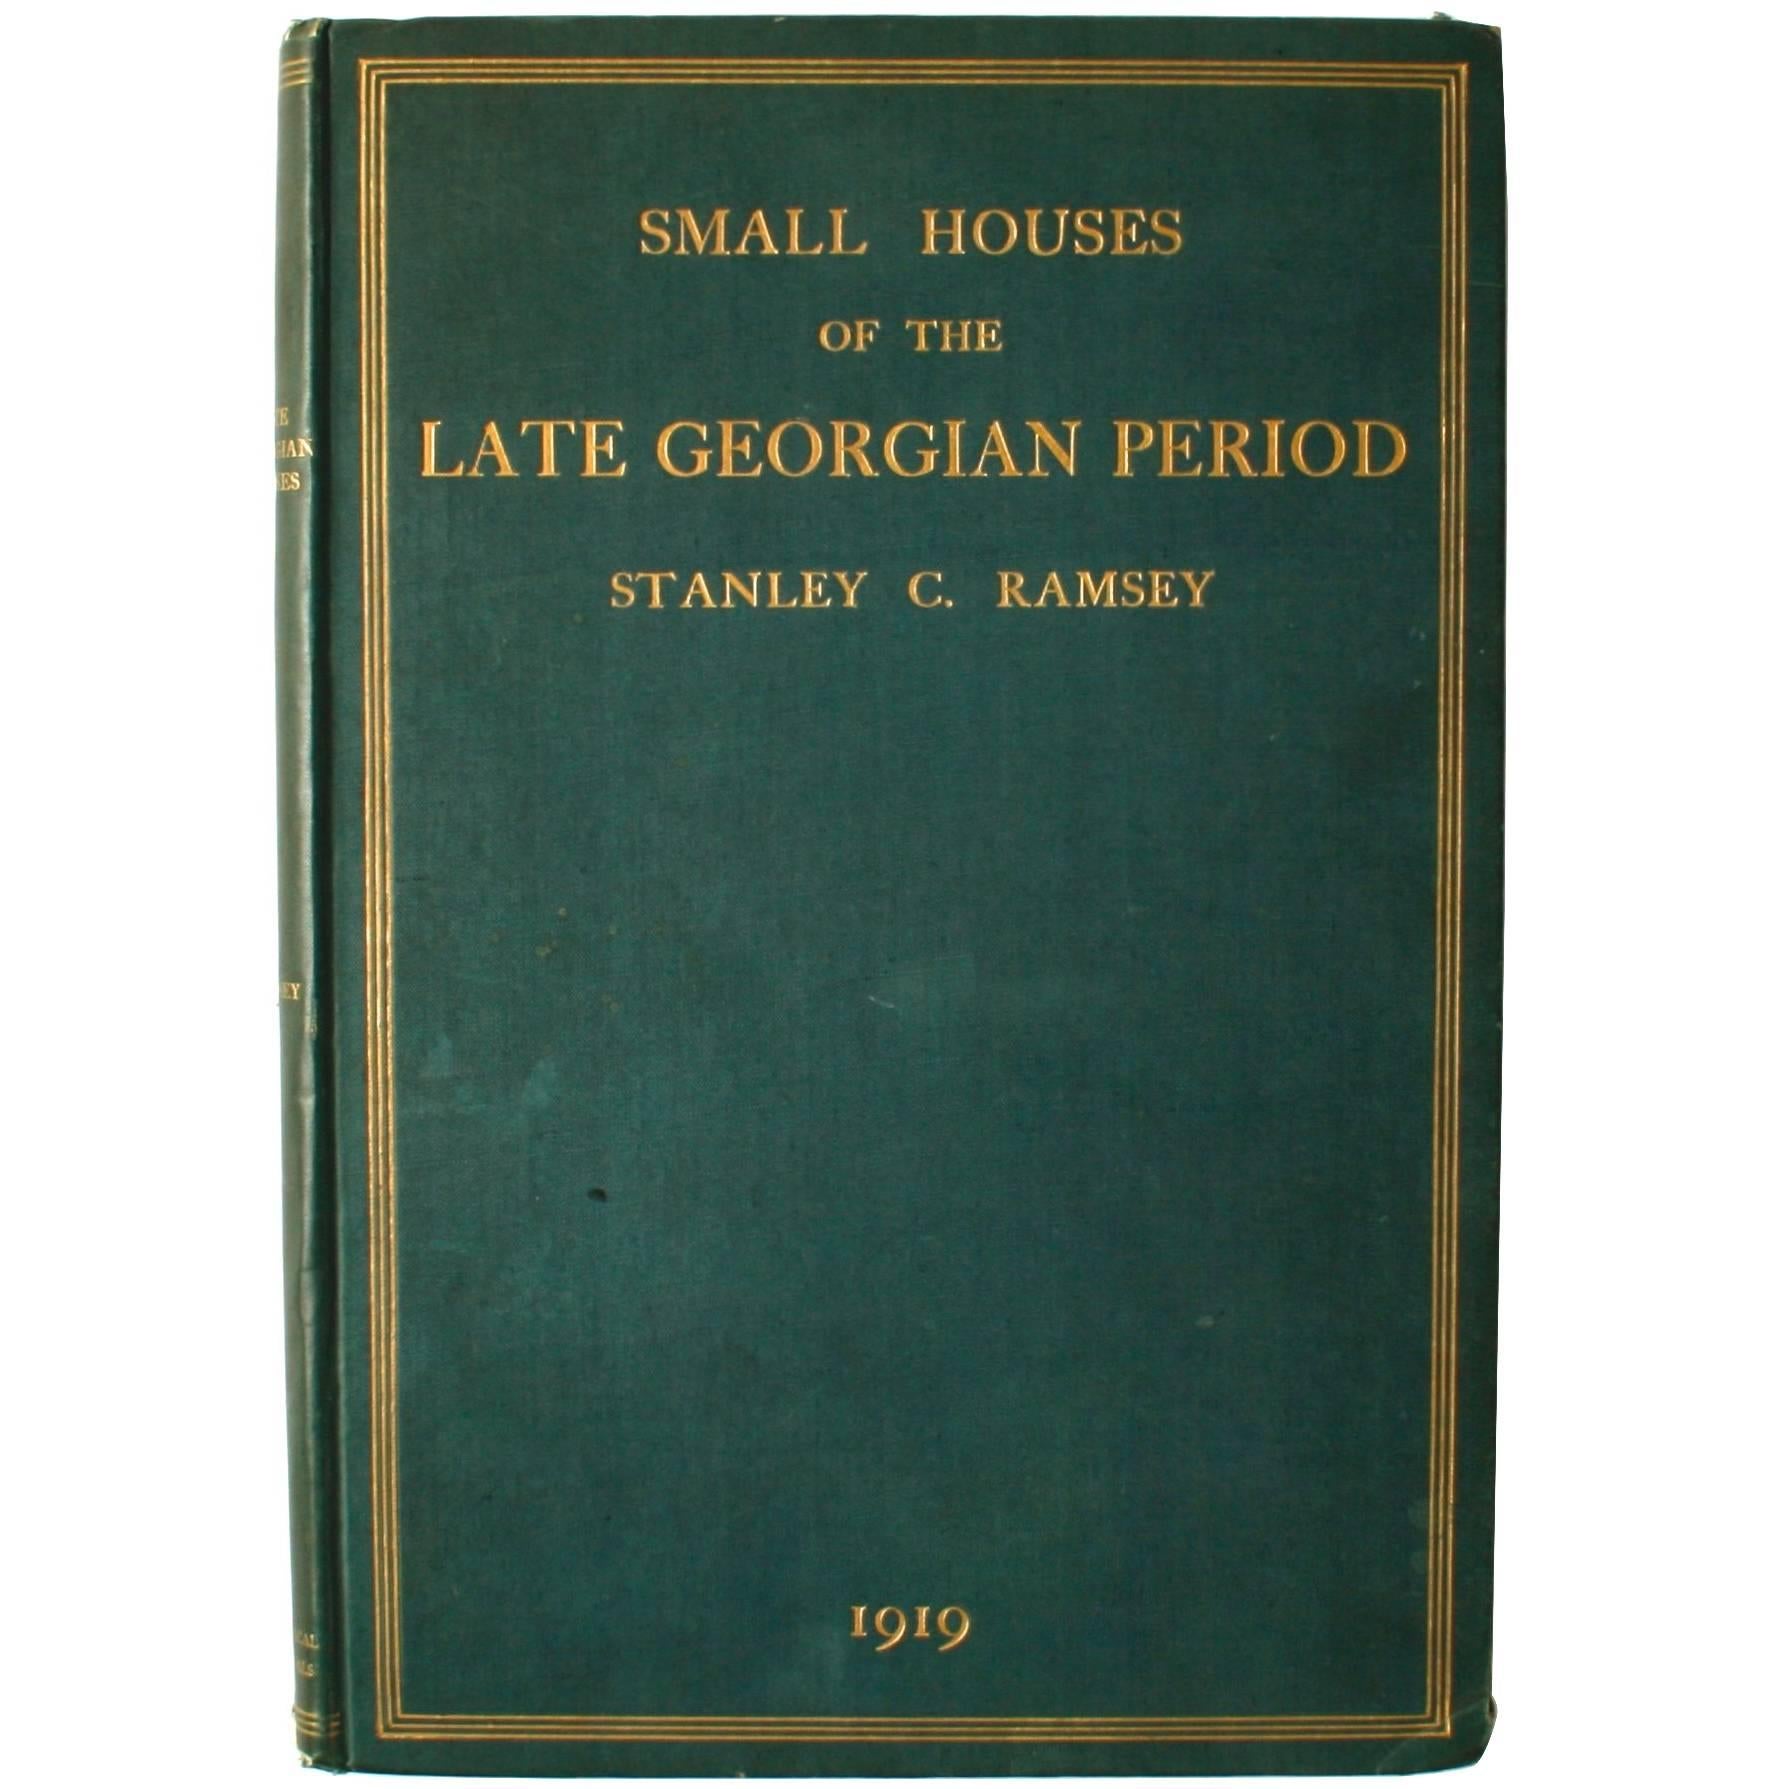 Small Houses of the Late Georgian Period by Stanley C. Ramsey, First Edition